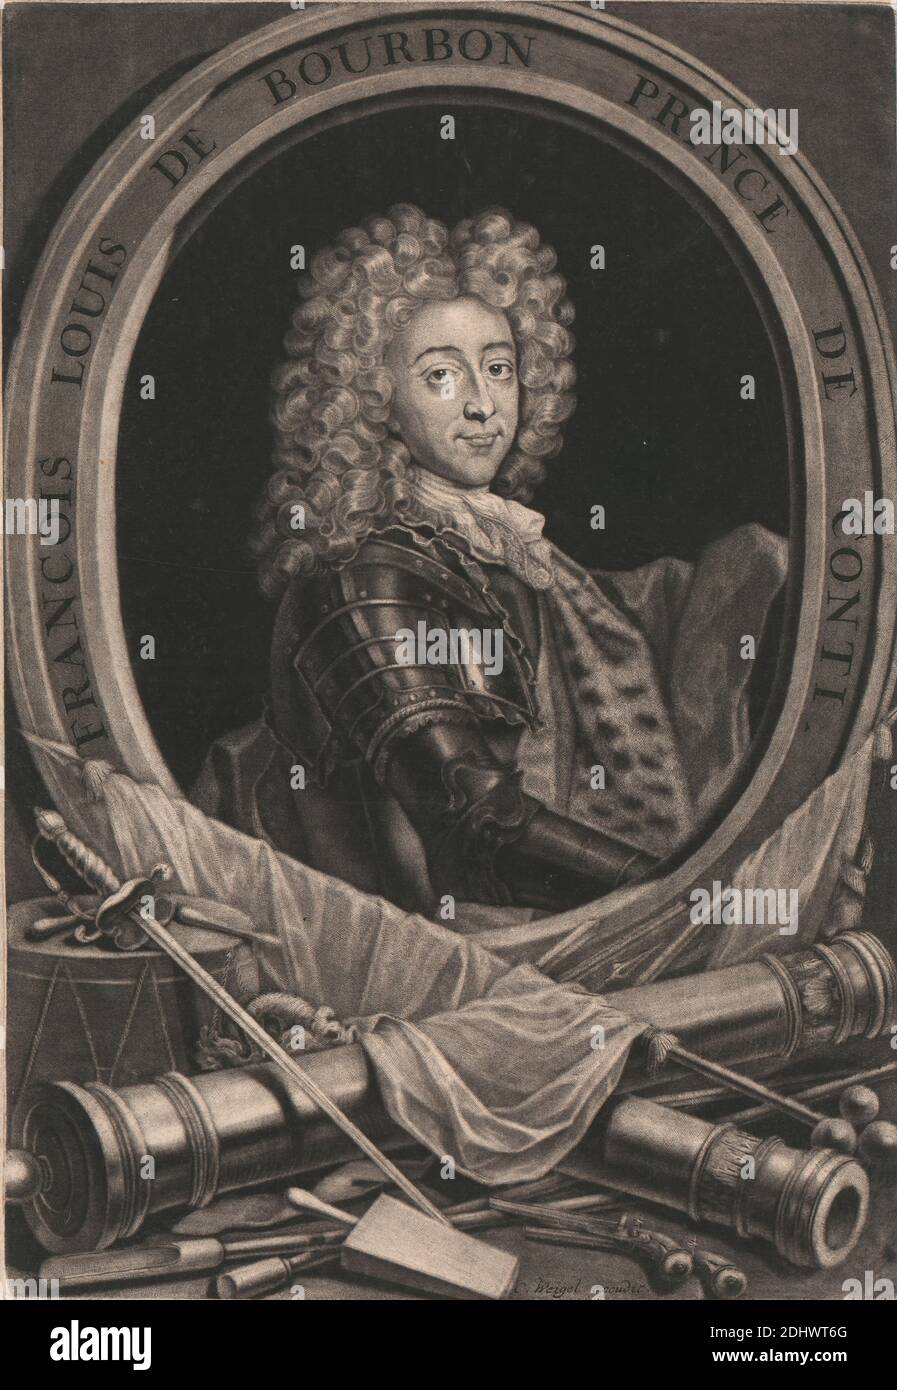 Francois Louis De Bourbon, Prince de Conti, Print made by Christoph Weigel, 1654–1725, Austrian, undated, Mezzotint on moderately thick, moderately textured, cream, laid paper, Sheet: 13 7/8 × 9 11/16 inches (35.2 × 24.6 cm Stock Photo